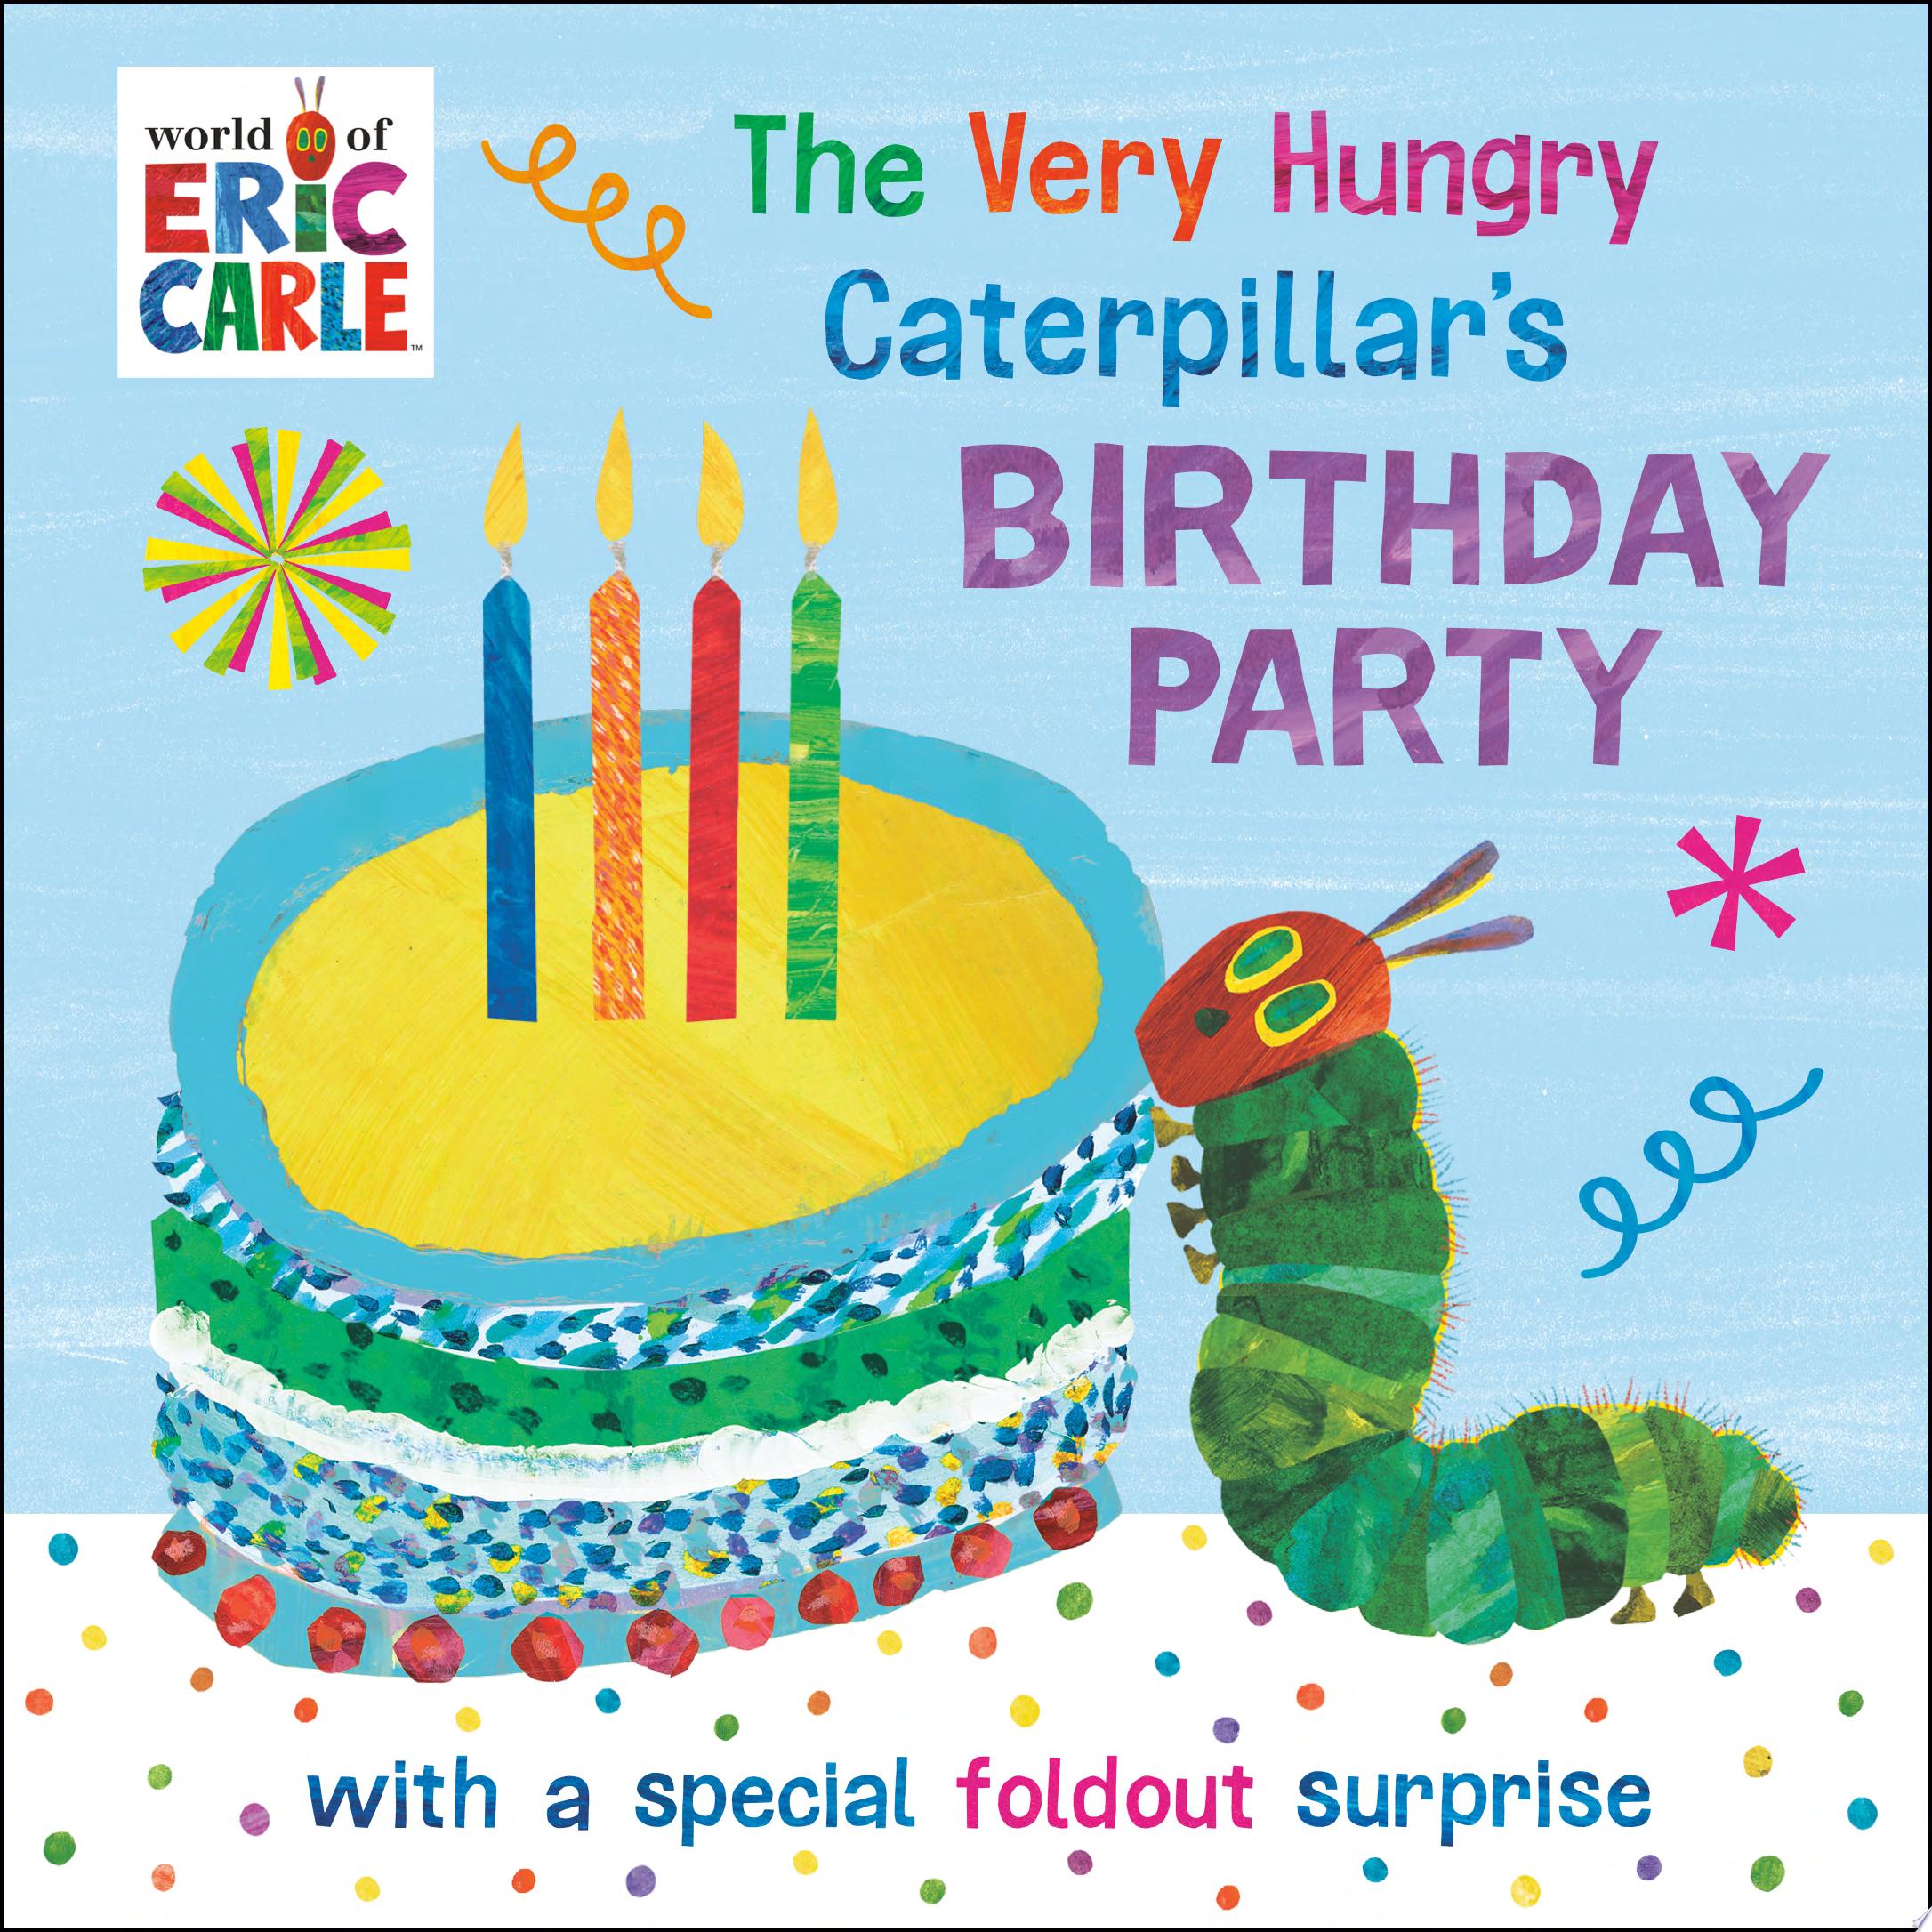 Image for "The Very Hungry Caterpillar&#039;s Birthday Party"